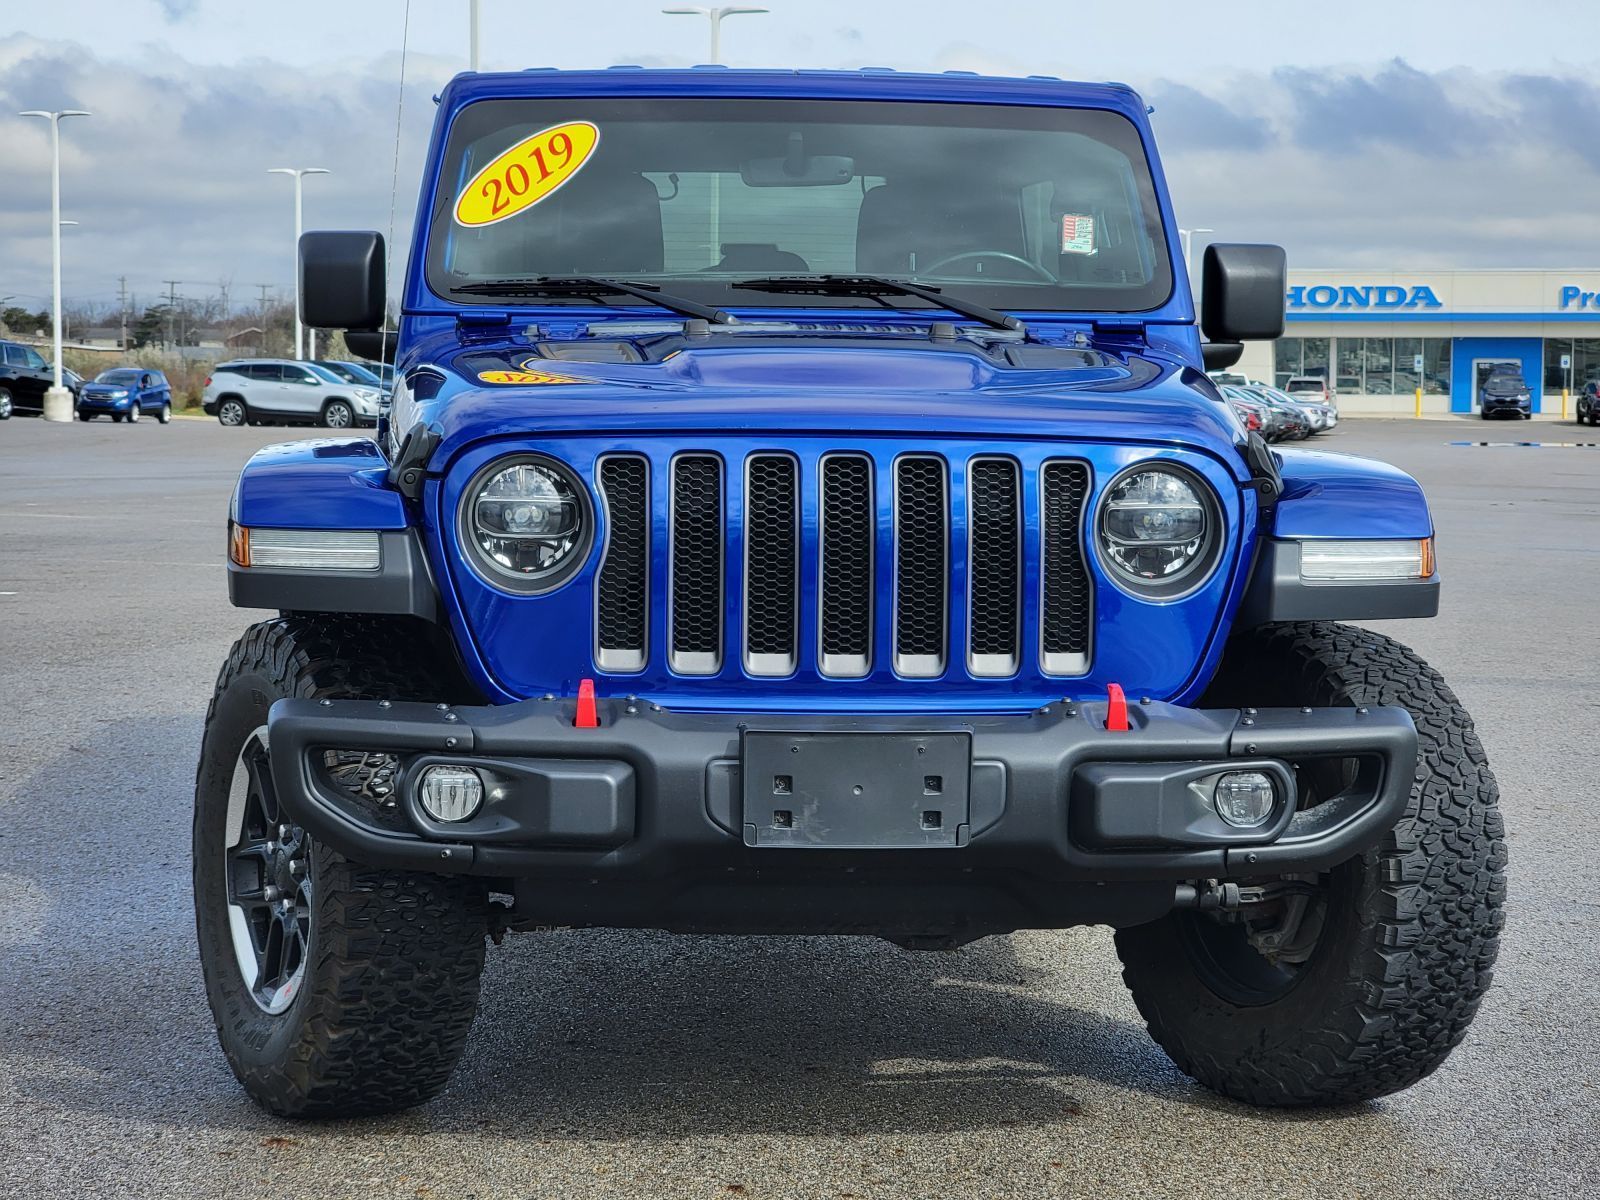 Used, 2019 Jeep Wrangler Unlimited Unlimited Rubicon, Blue, P0529-9